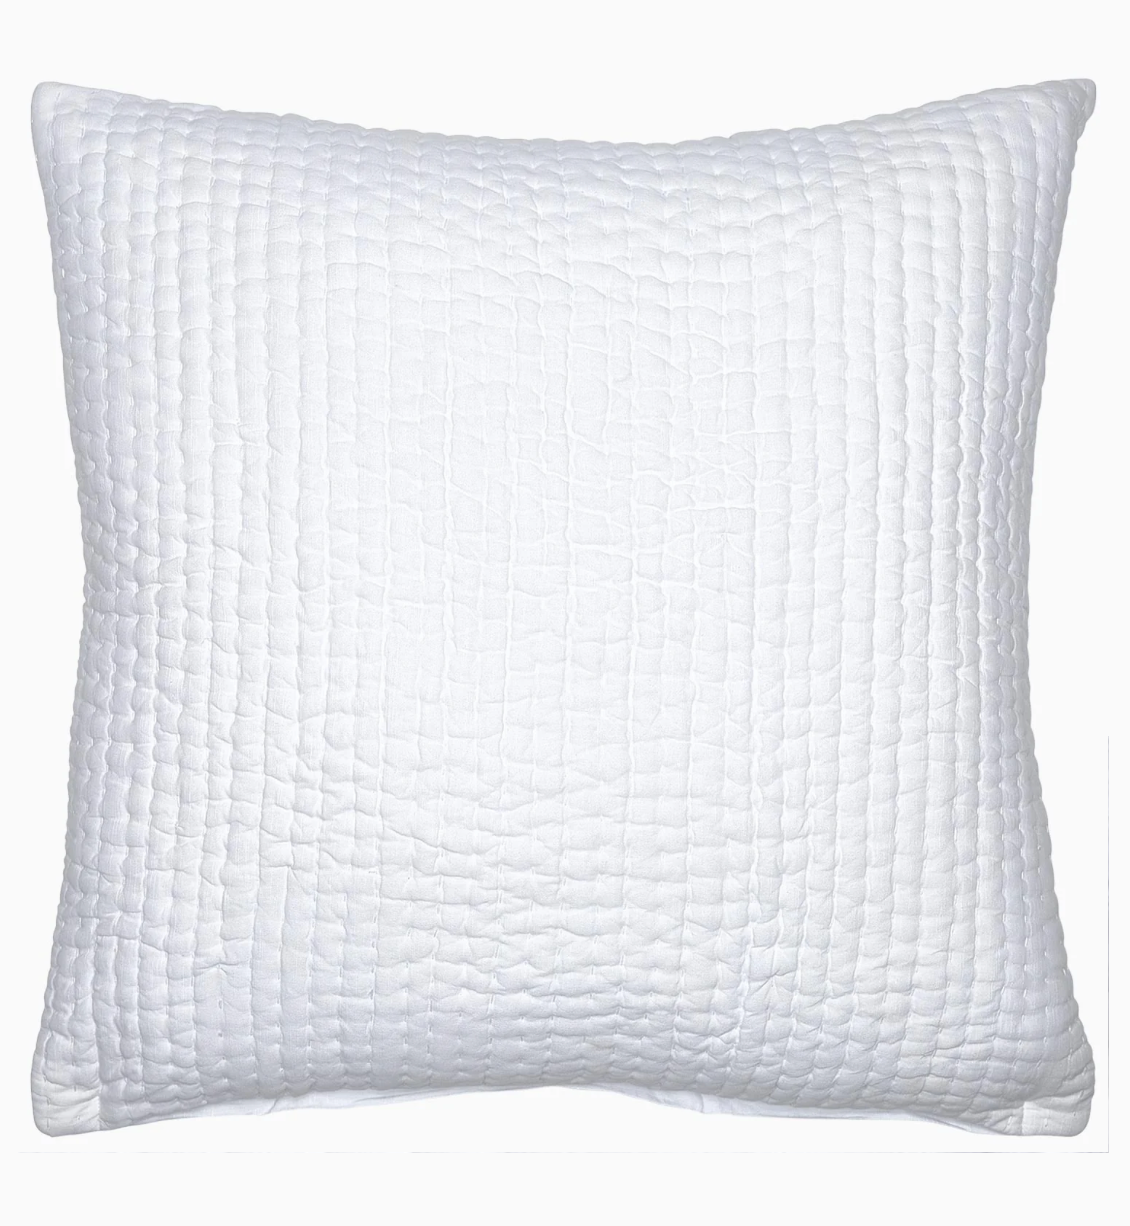 Vivada Quilted Woven Euro Sham